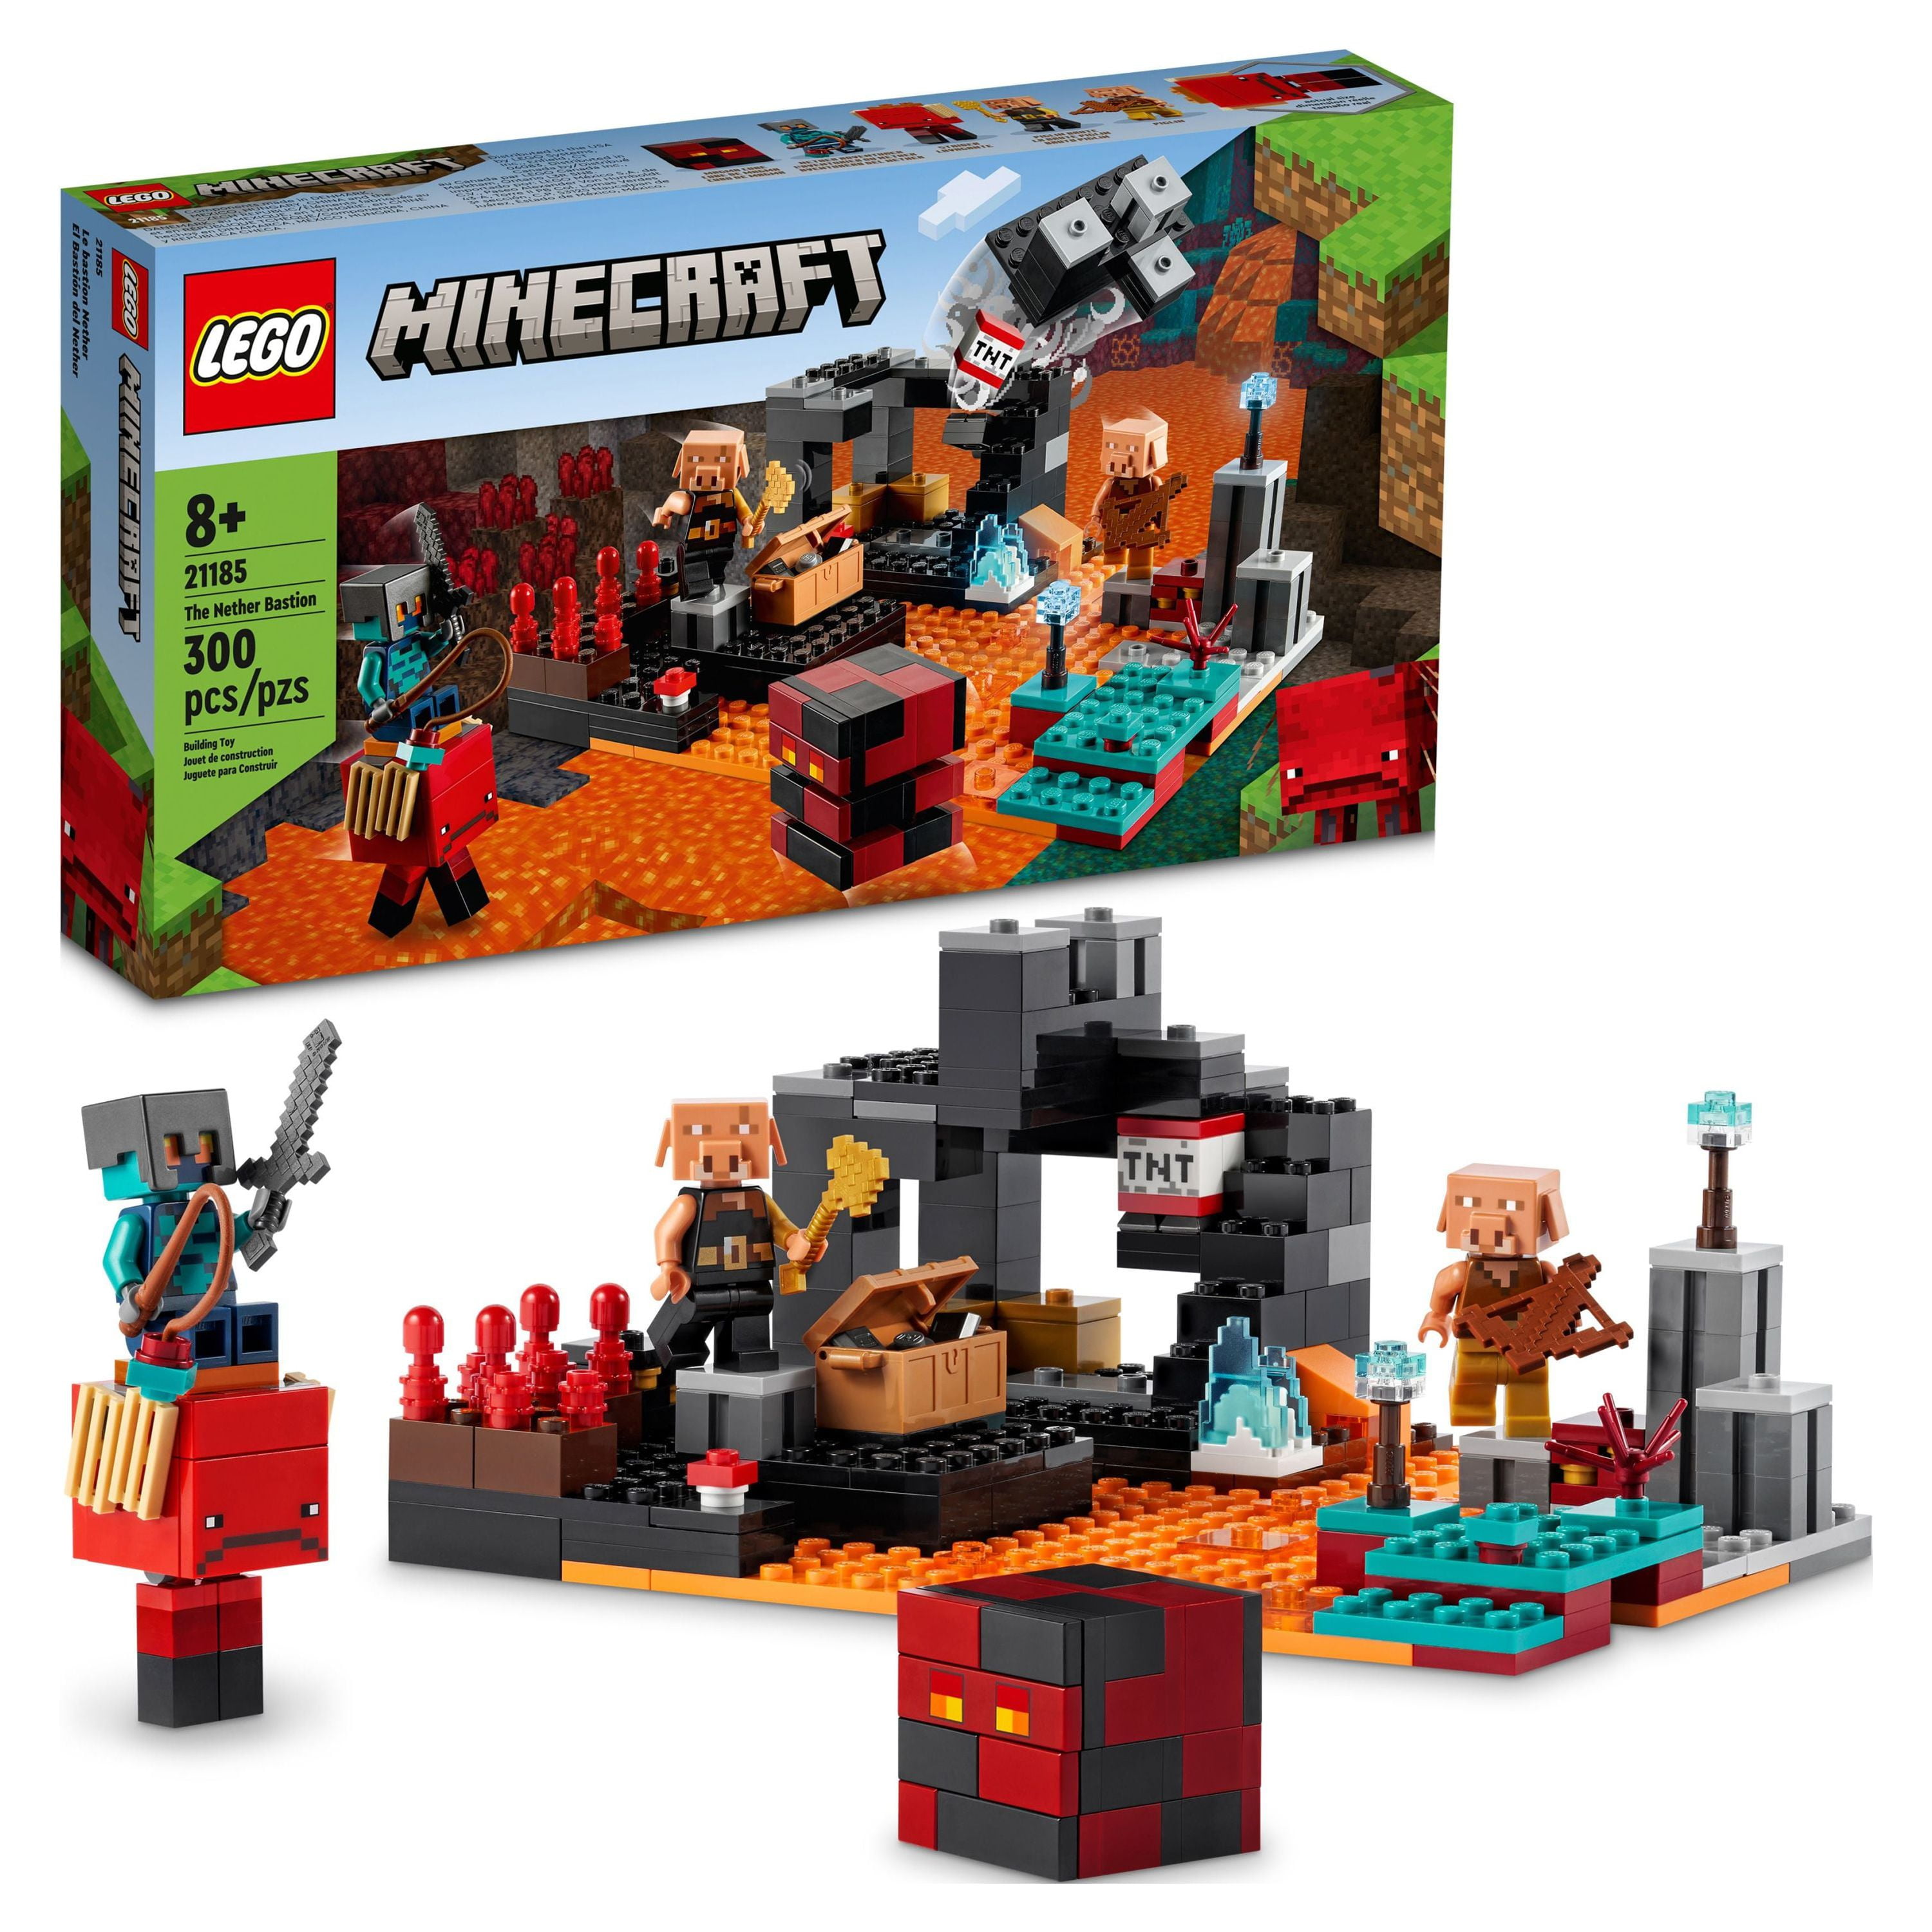 LEGO Minecraft The Nether Bastion Set, 21185 Battle Action Toy with Mob,  Piglin Brute & Strider Figures, for Kids, Boys and Girls Age 8 Plus 